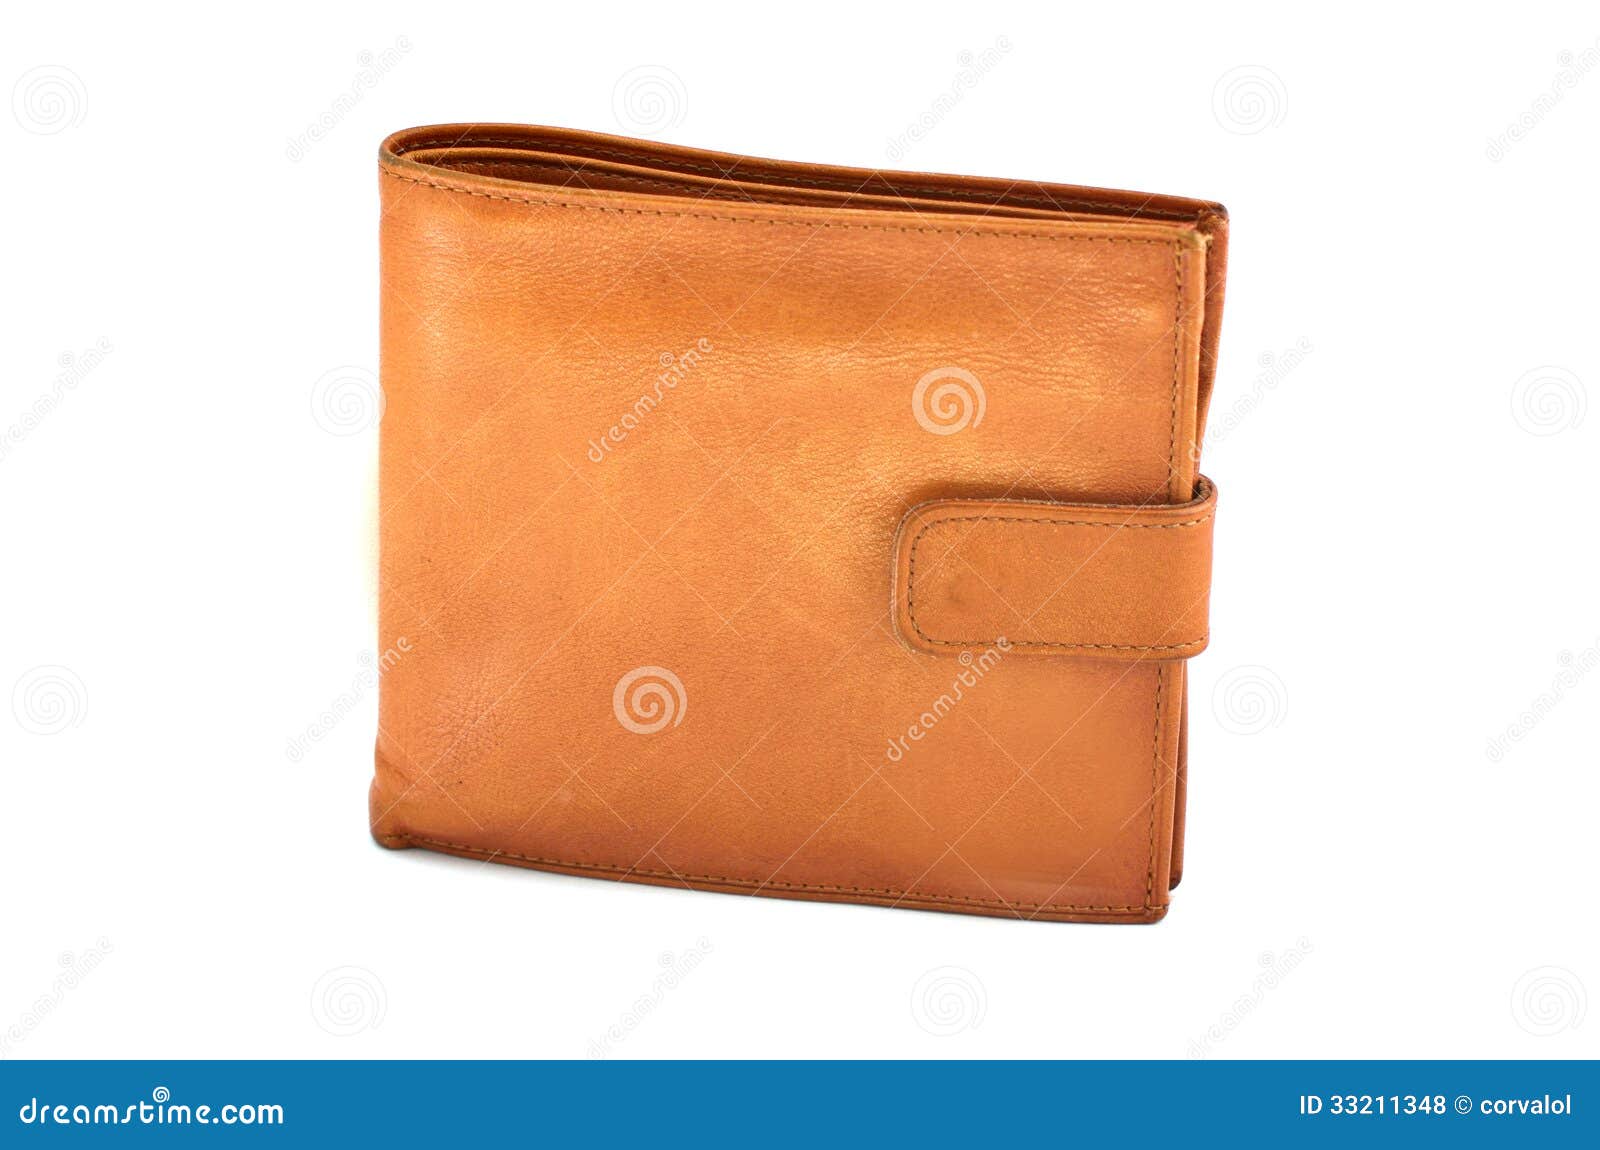 Wallet purse stock photo. Image of wallet, brown, white - 33211348